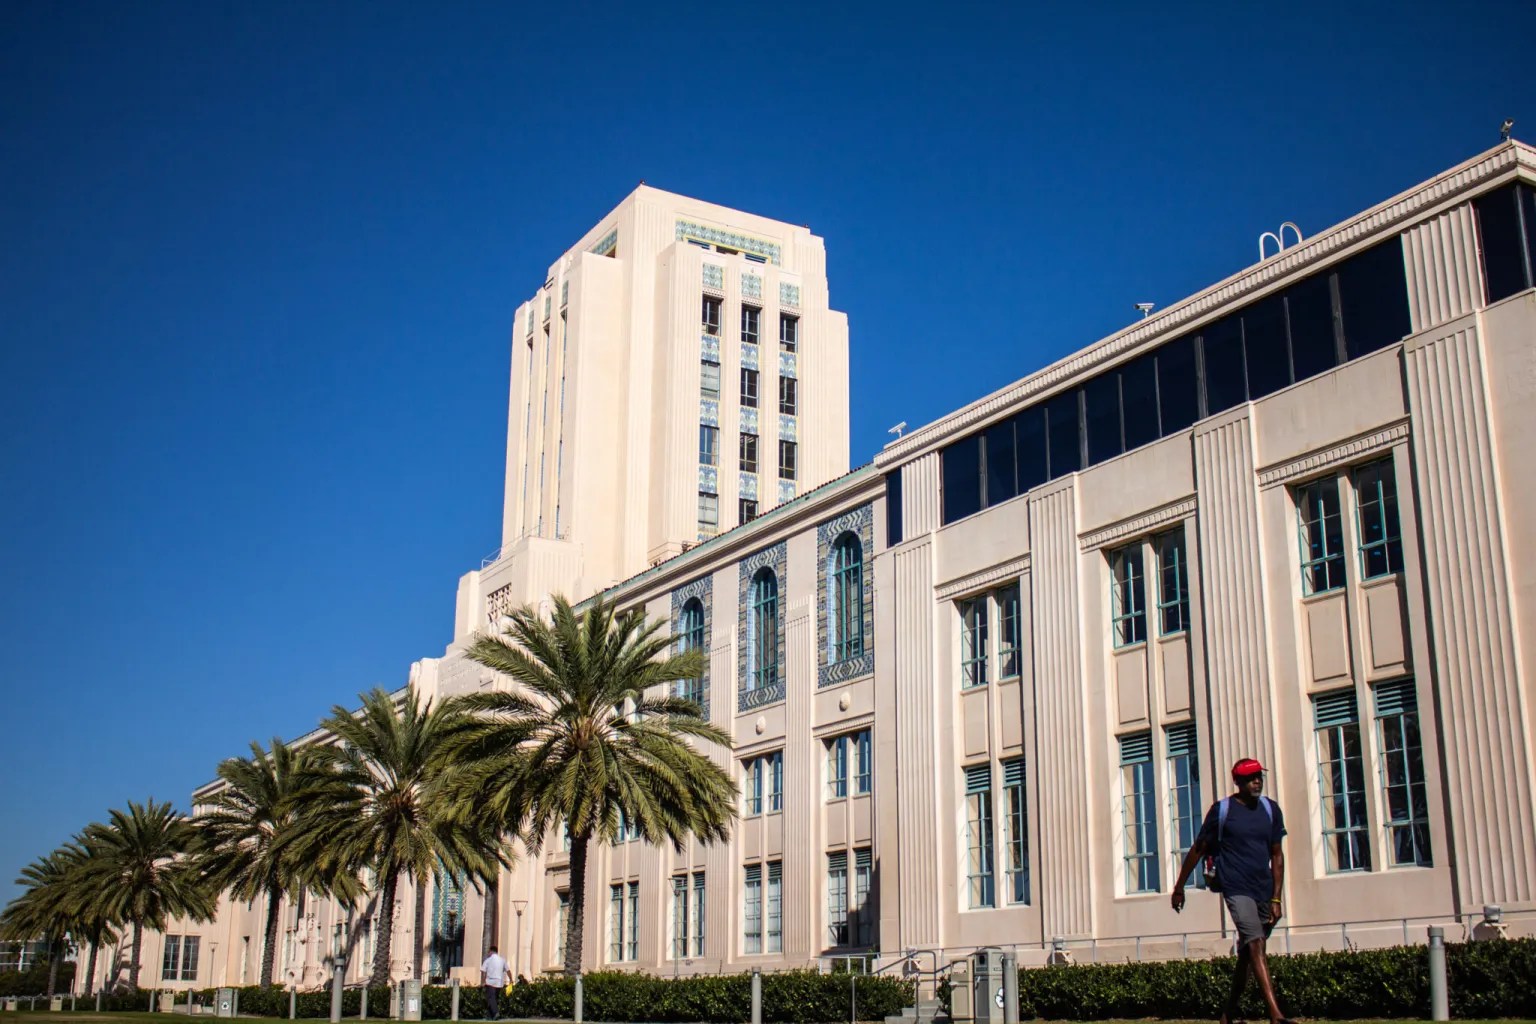 This shows the San Diego County administrative building. It is a long beige building with windows on the front. Palm trees grow in a line next to the building. A taller part of the building is in the center. A person wearing darn shorts, a dark t-shirt and a red visor walks by.